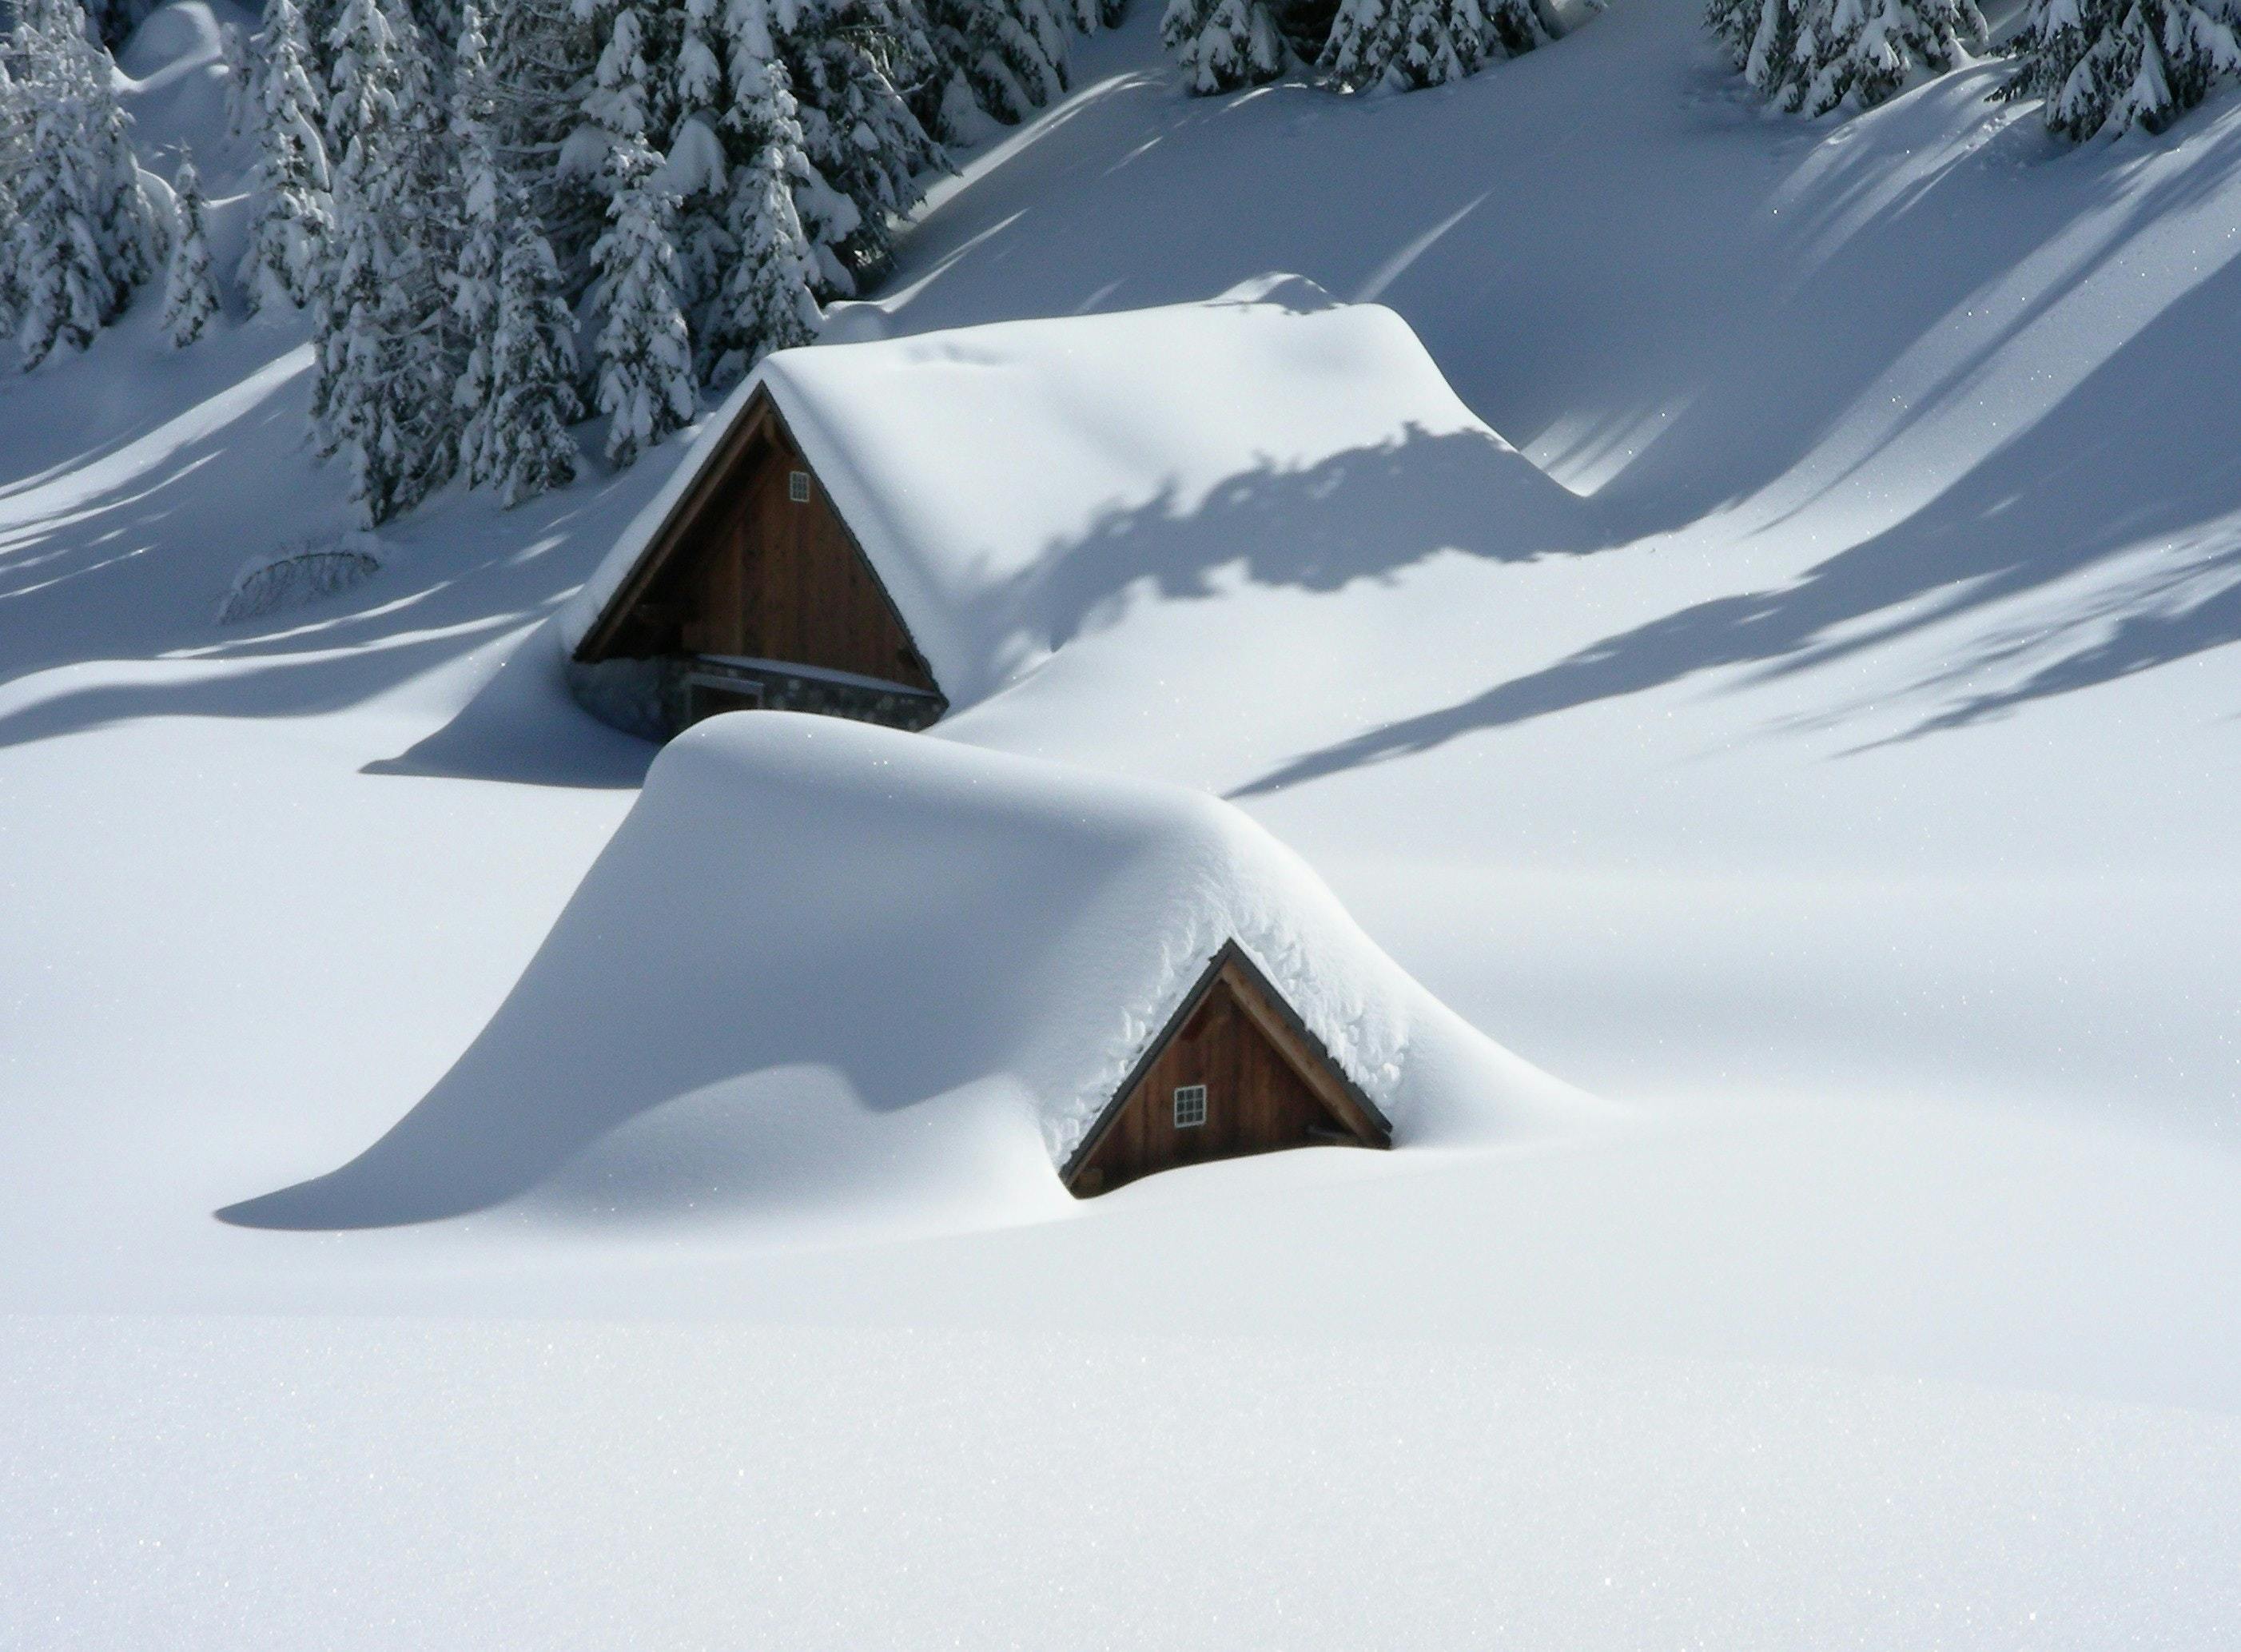 Heavy snow covering cabins